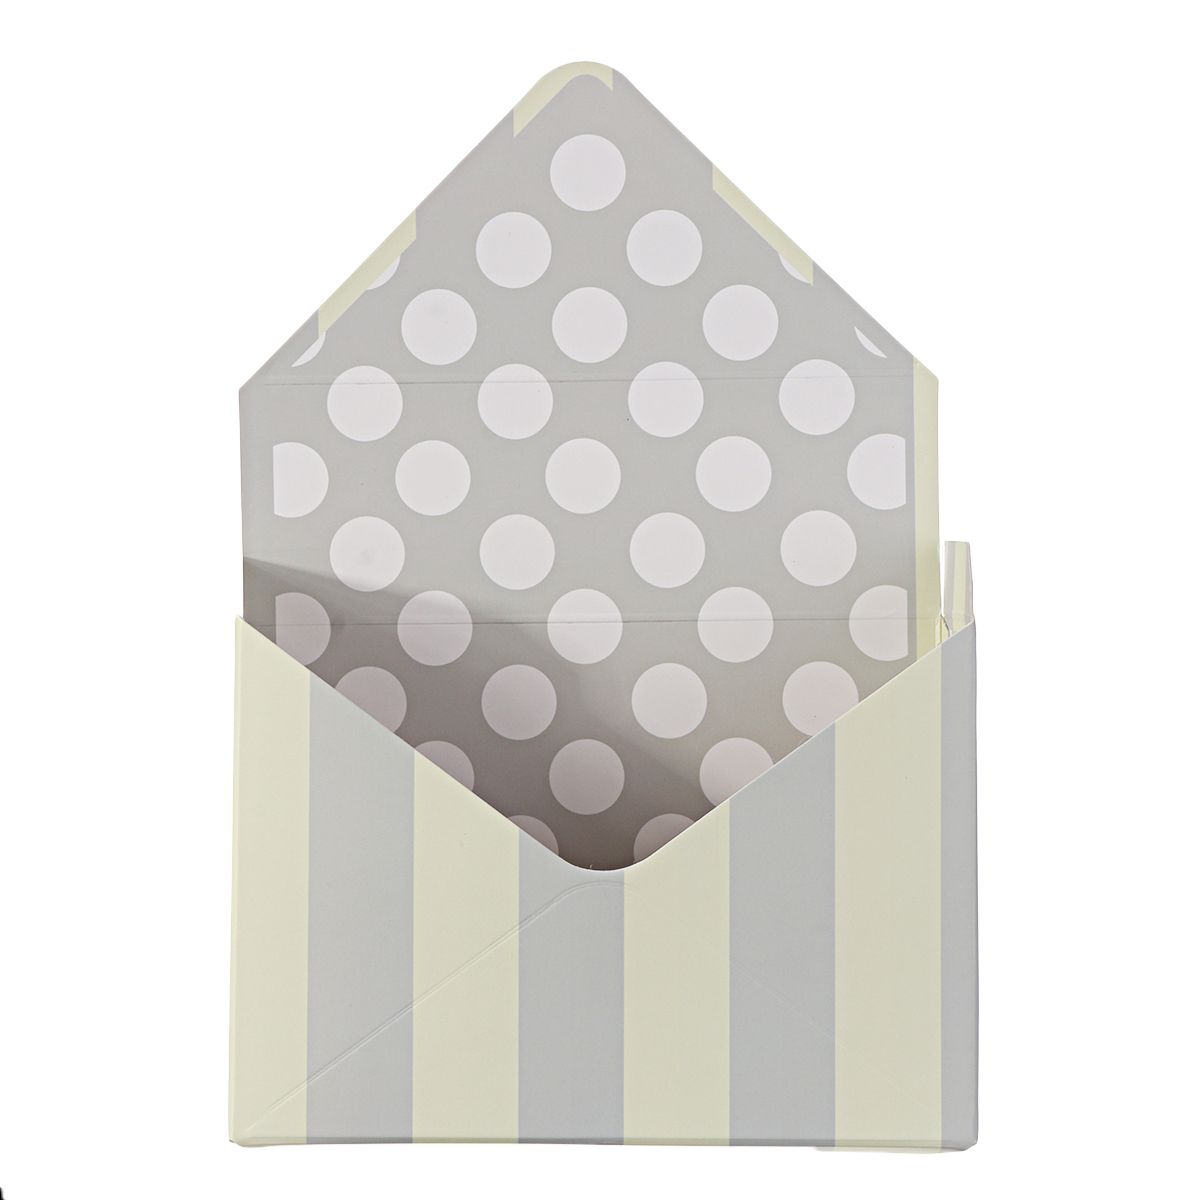 12PcsSet-Envelope-Folding-Flower-Boxes-Paper-Floral-Wrapping-Gift-Party-Wedding-1736344